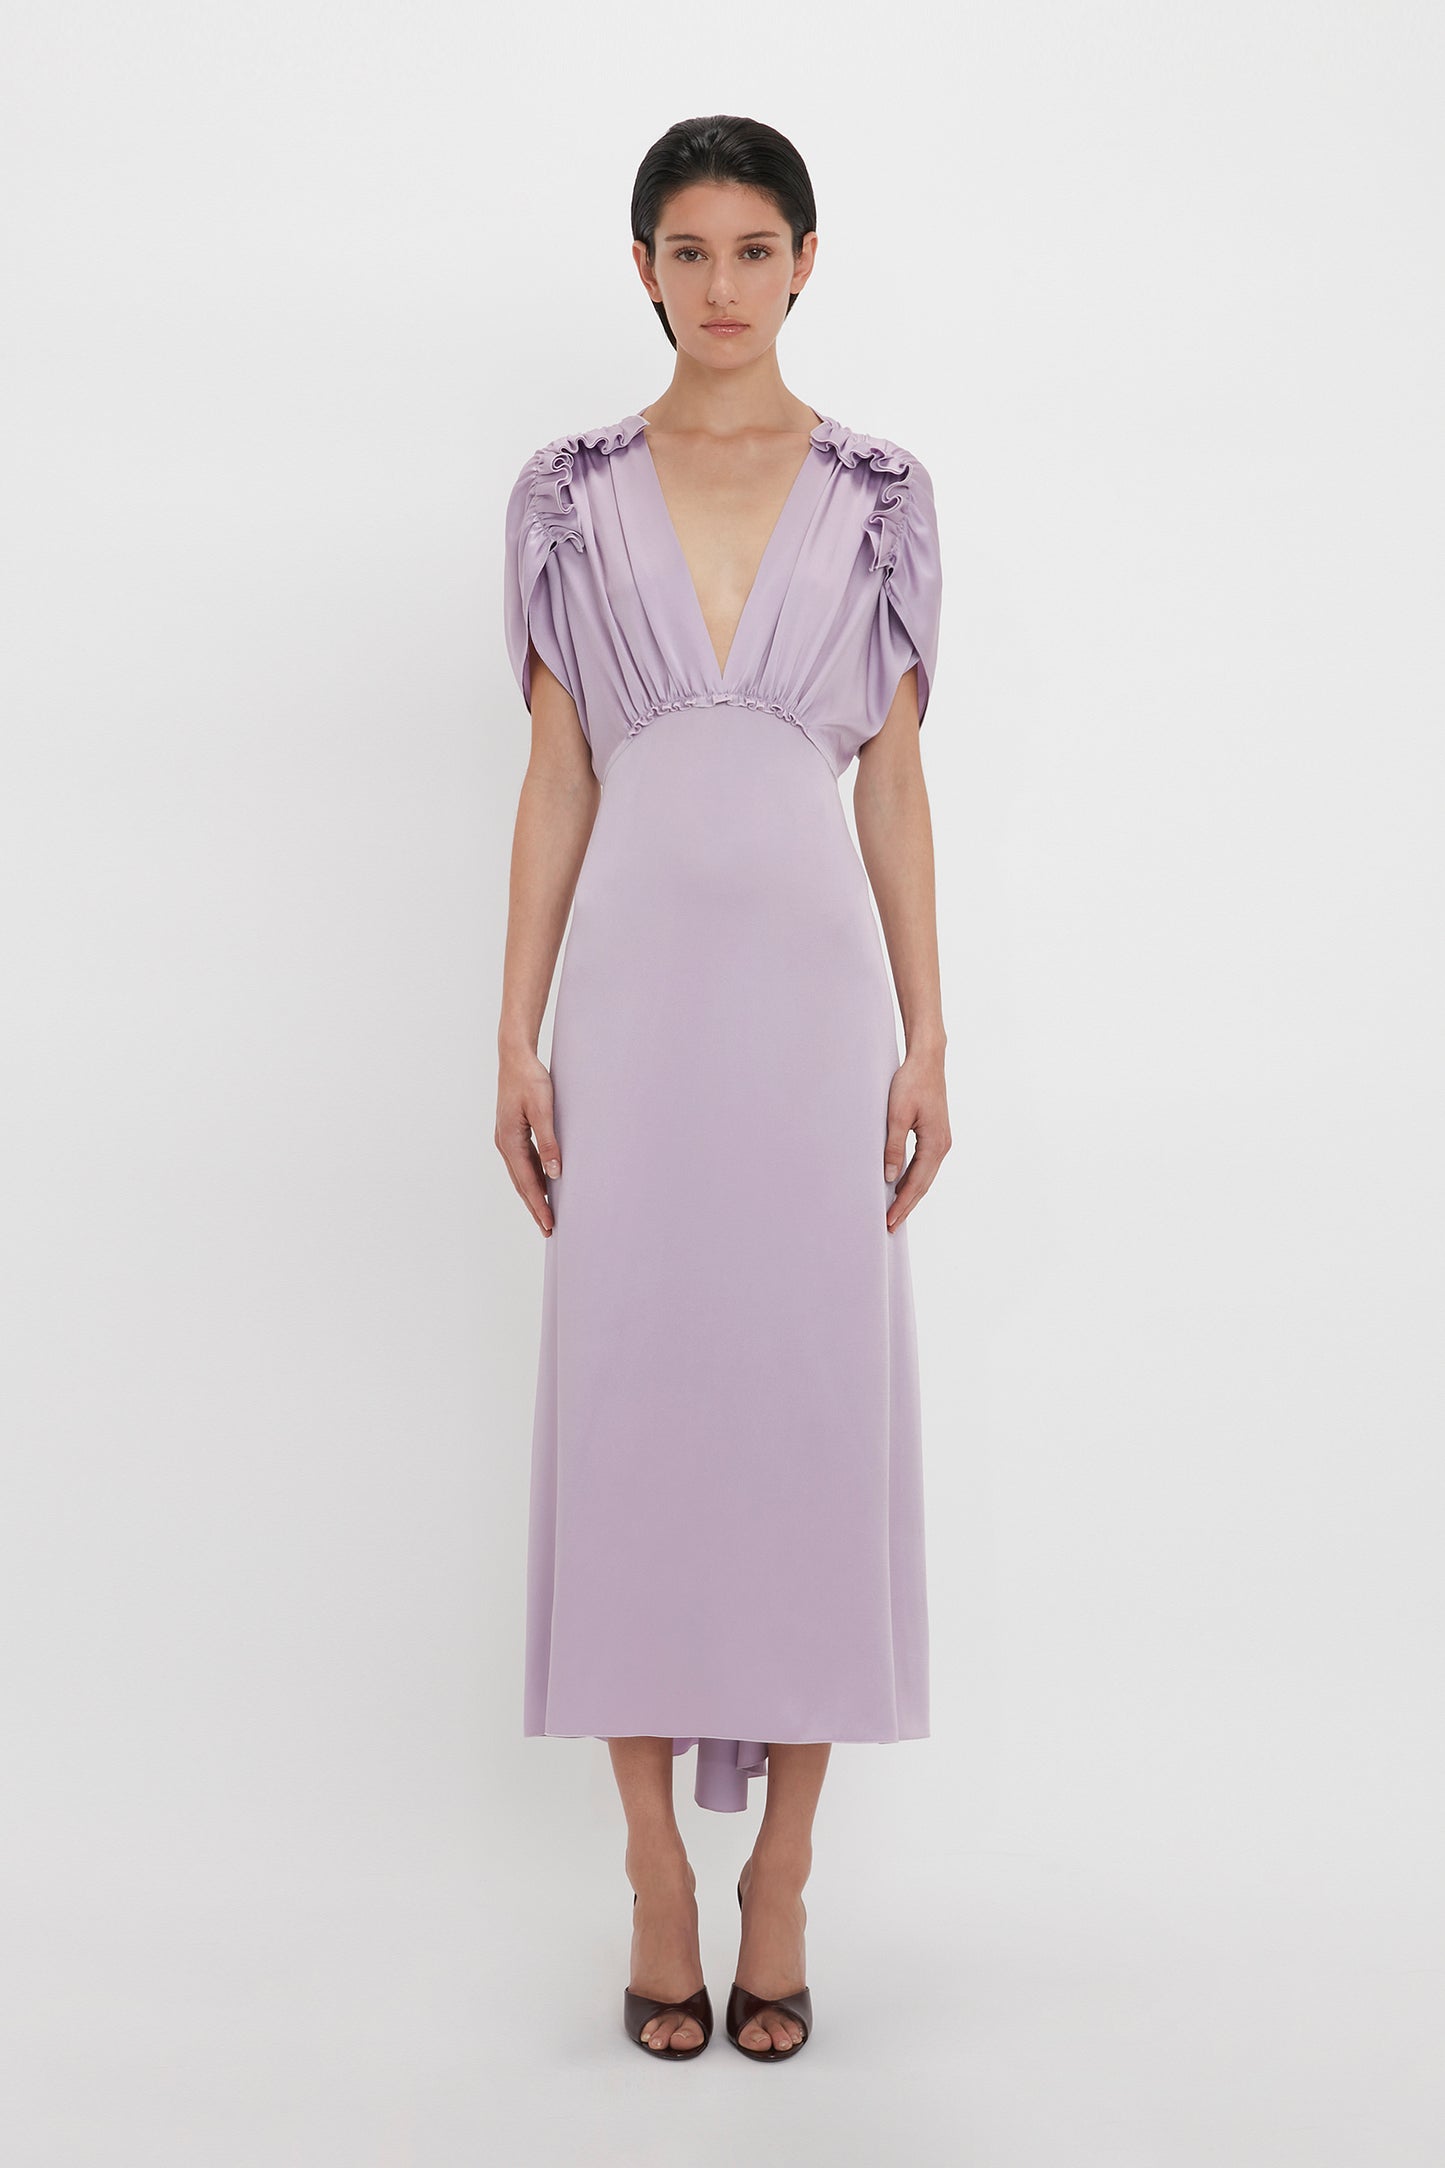 A person stands against a white background, wearing an elegant light purple dress with short, gathered sleeves and a deep V-neck. The ankle-length dress, a V-Neck Ruffle Midi Dress In Petunia from Victoria Beckham, is paired with black heeled shoes.